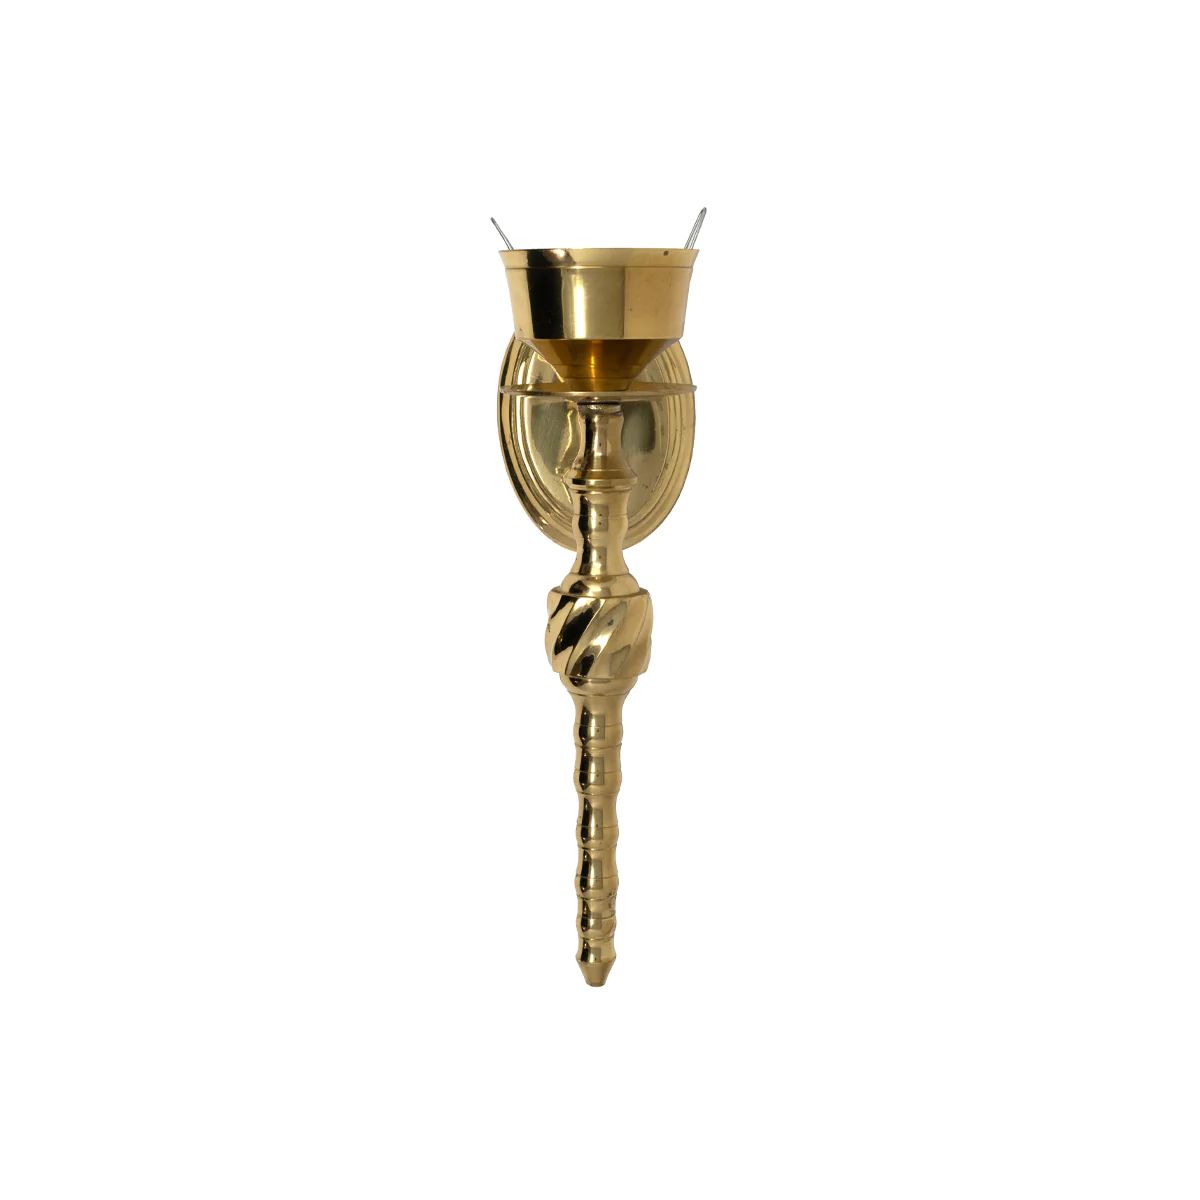 Vintage Brass Finial Candle Holder | Tuesday Made